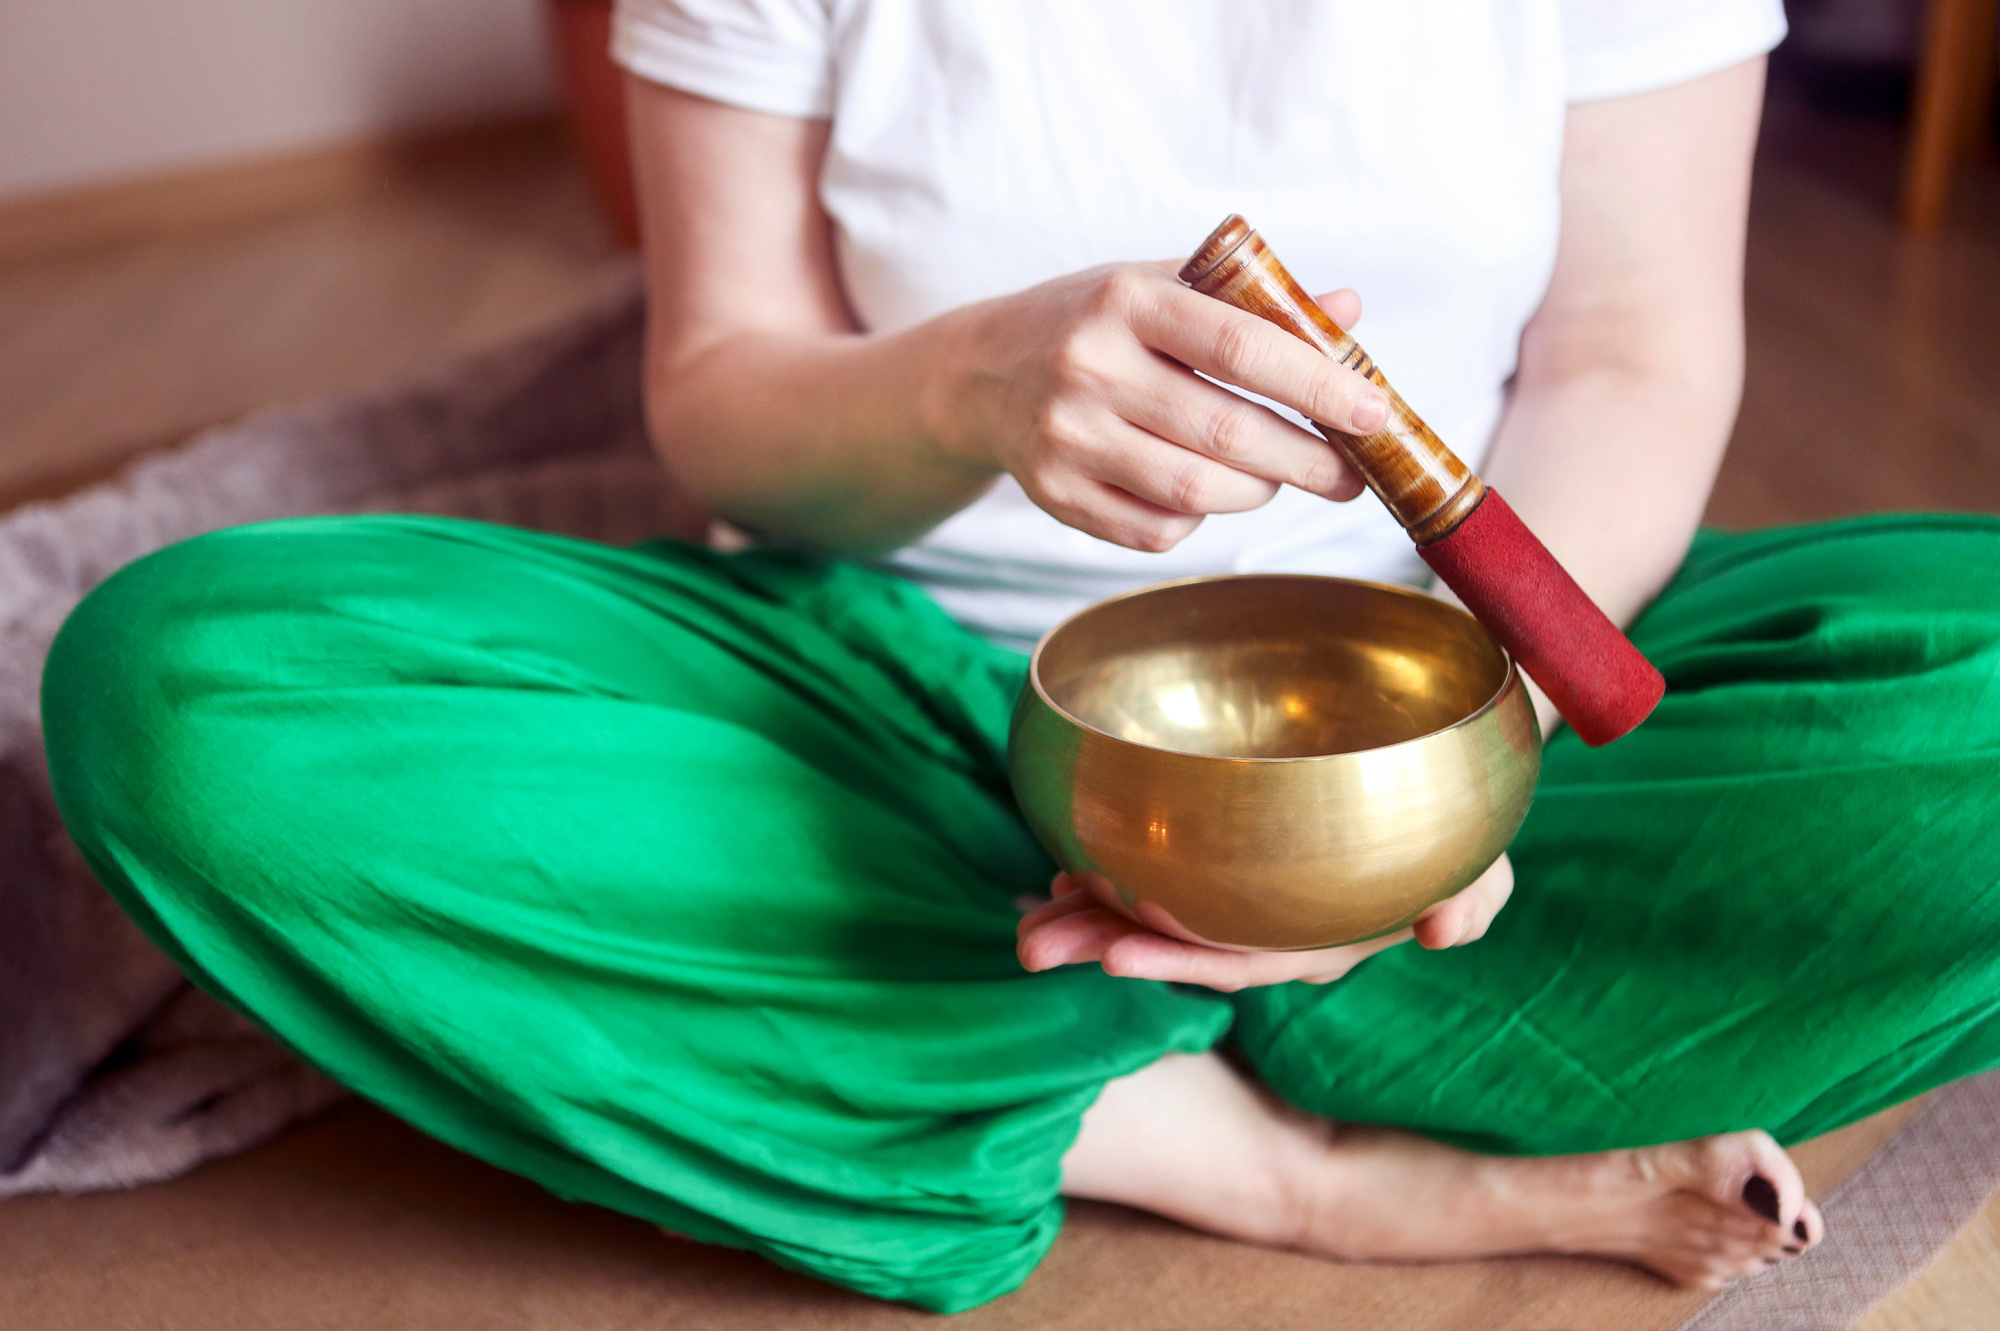 habits to improve wellbeing, woman using Tibetan Singing Bowl, sound therapy, self care, self care routine, how to find time for self care